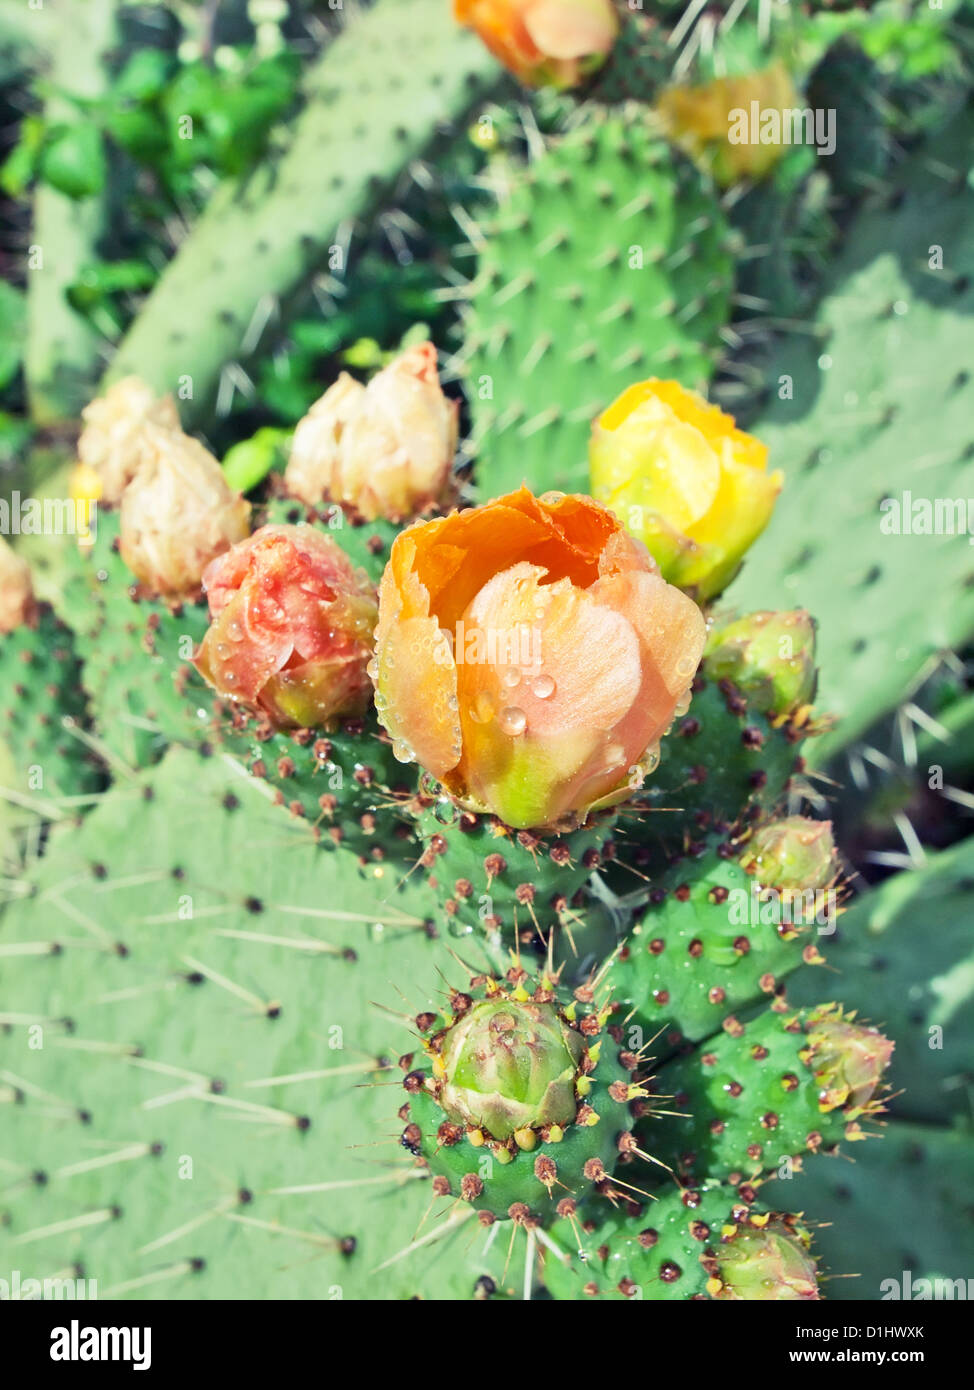 Prickly pear plant (cactus) in blossom after rain Stock Photo